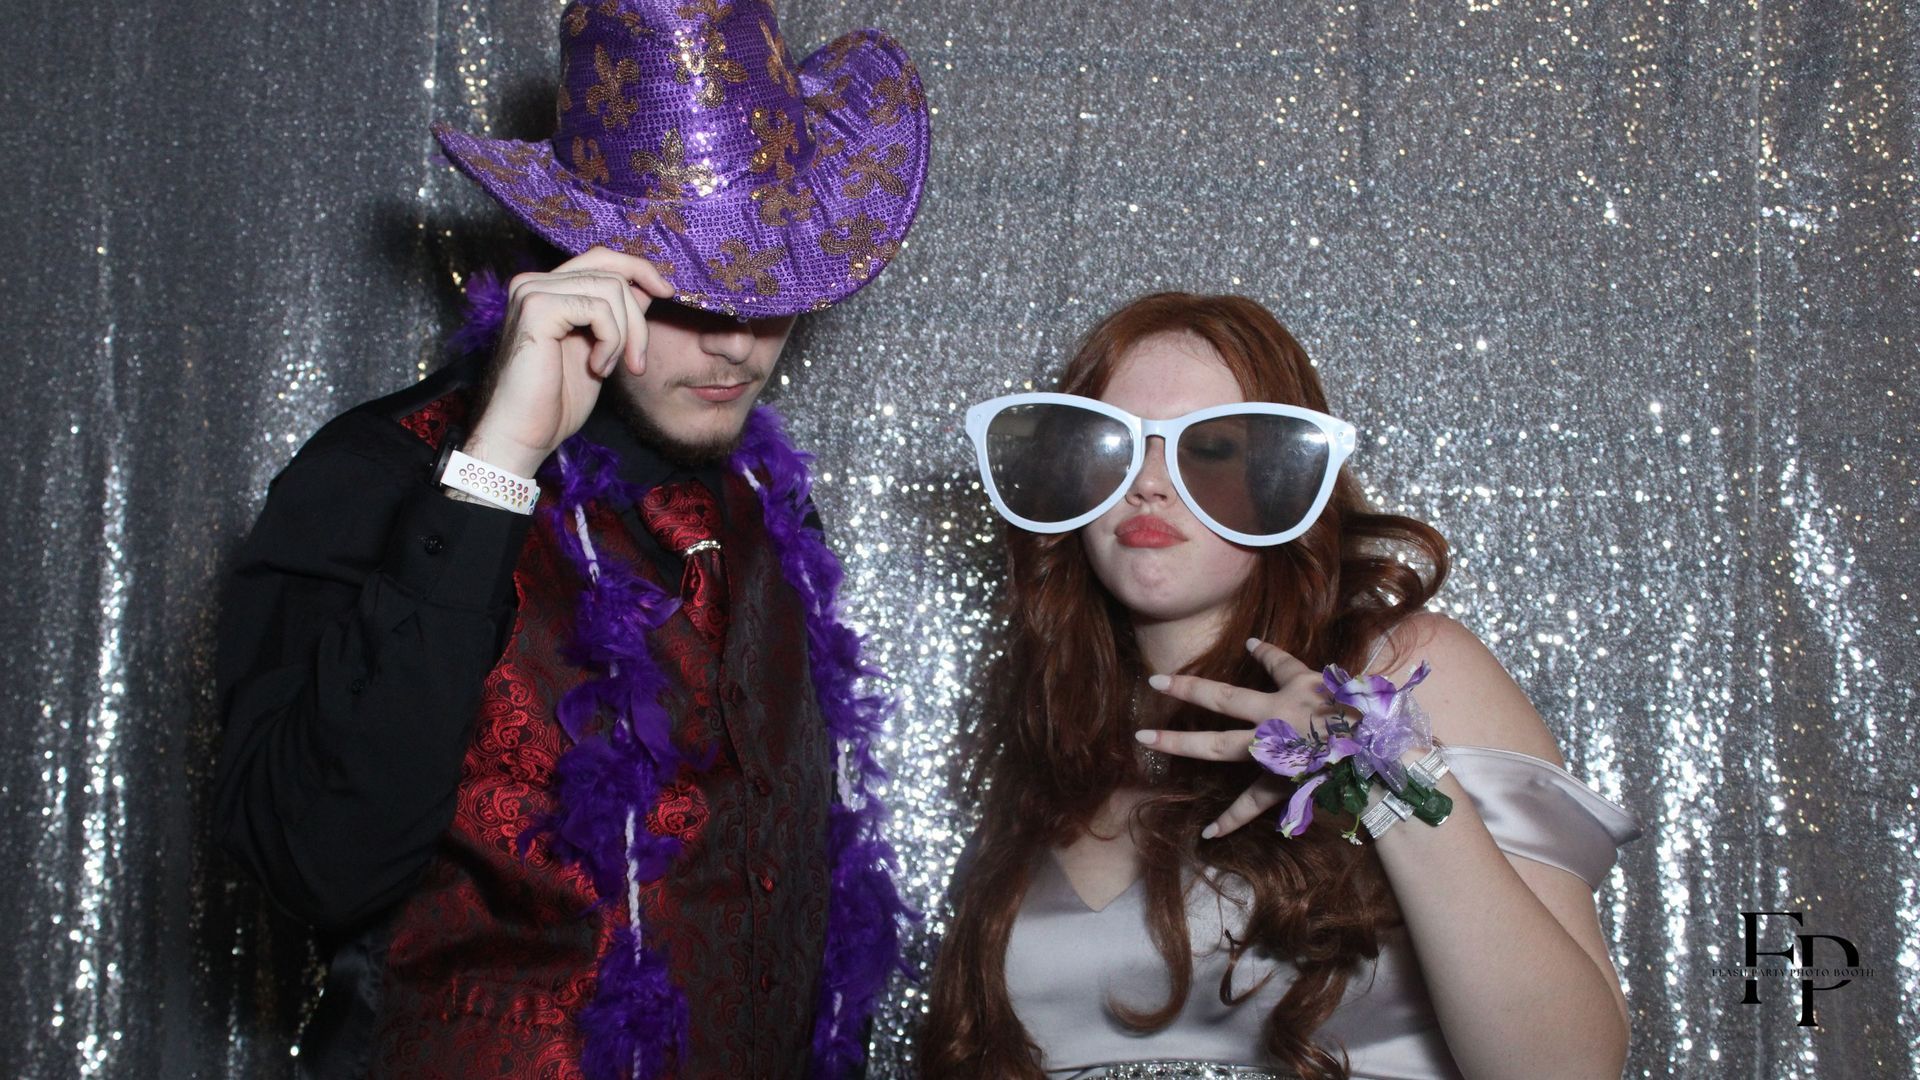 A couple wearing sunglasses poses in a 360 Photo Booth, capturing a fun and stylish moment together.